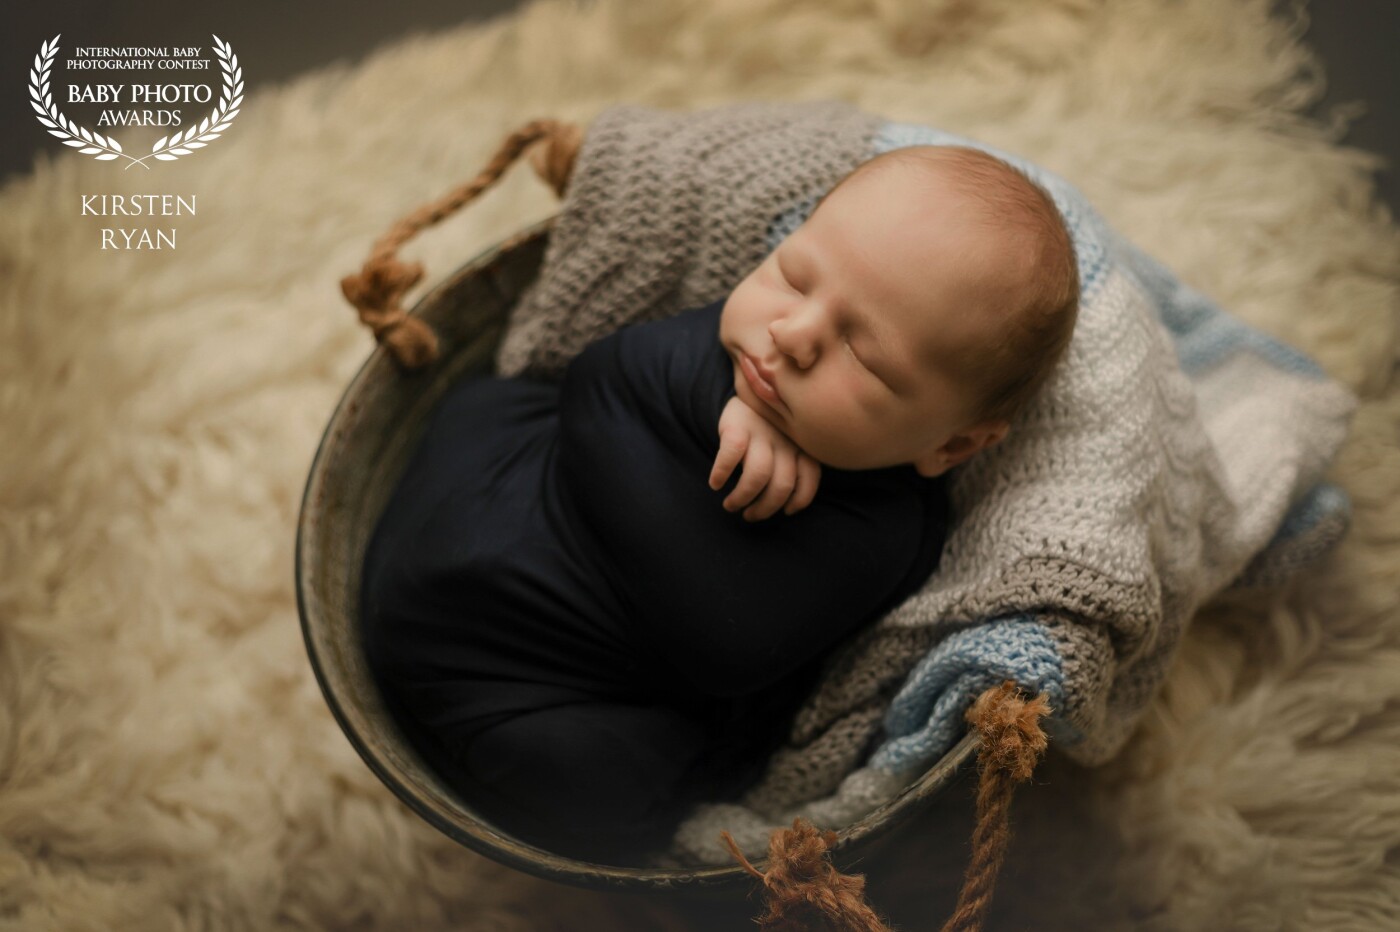 This little guy was 7 days new and he was an absolute dream to photograph he slept right through his session... his session has so many of my favourite pictures in it... absolutely perfection.